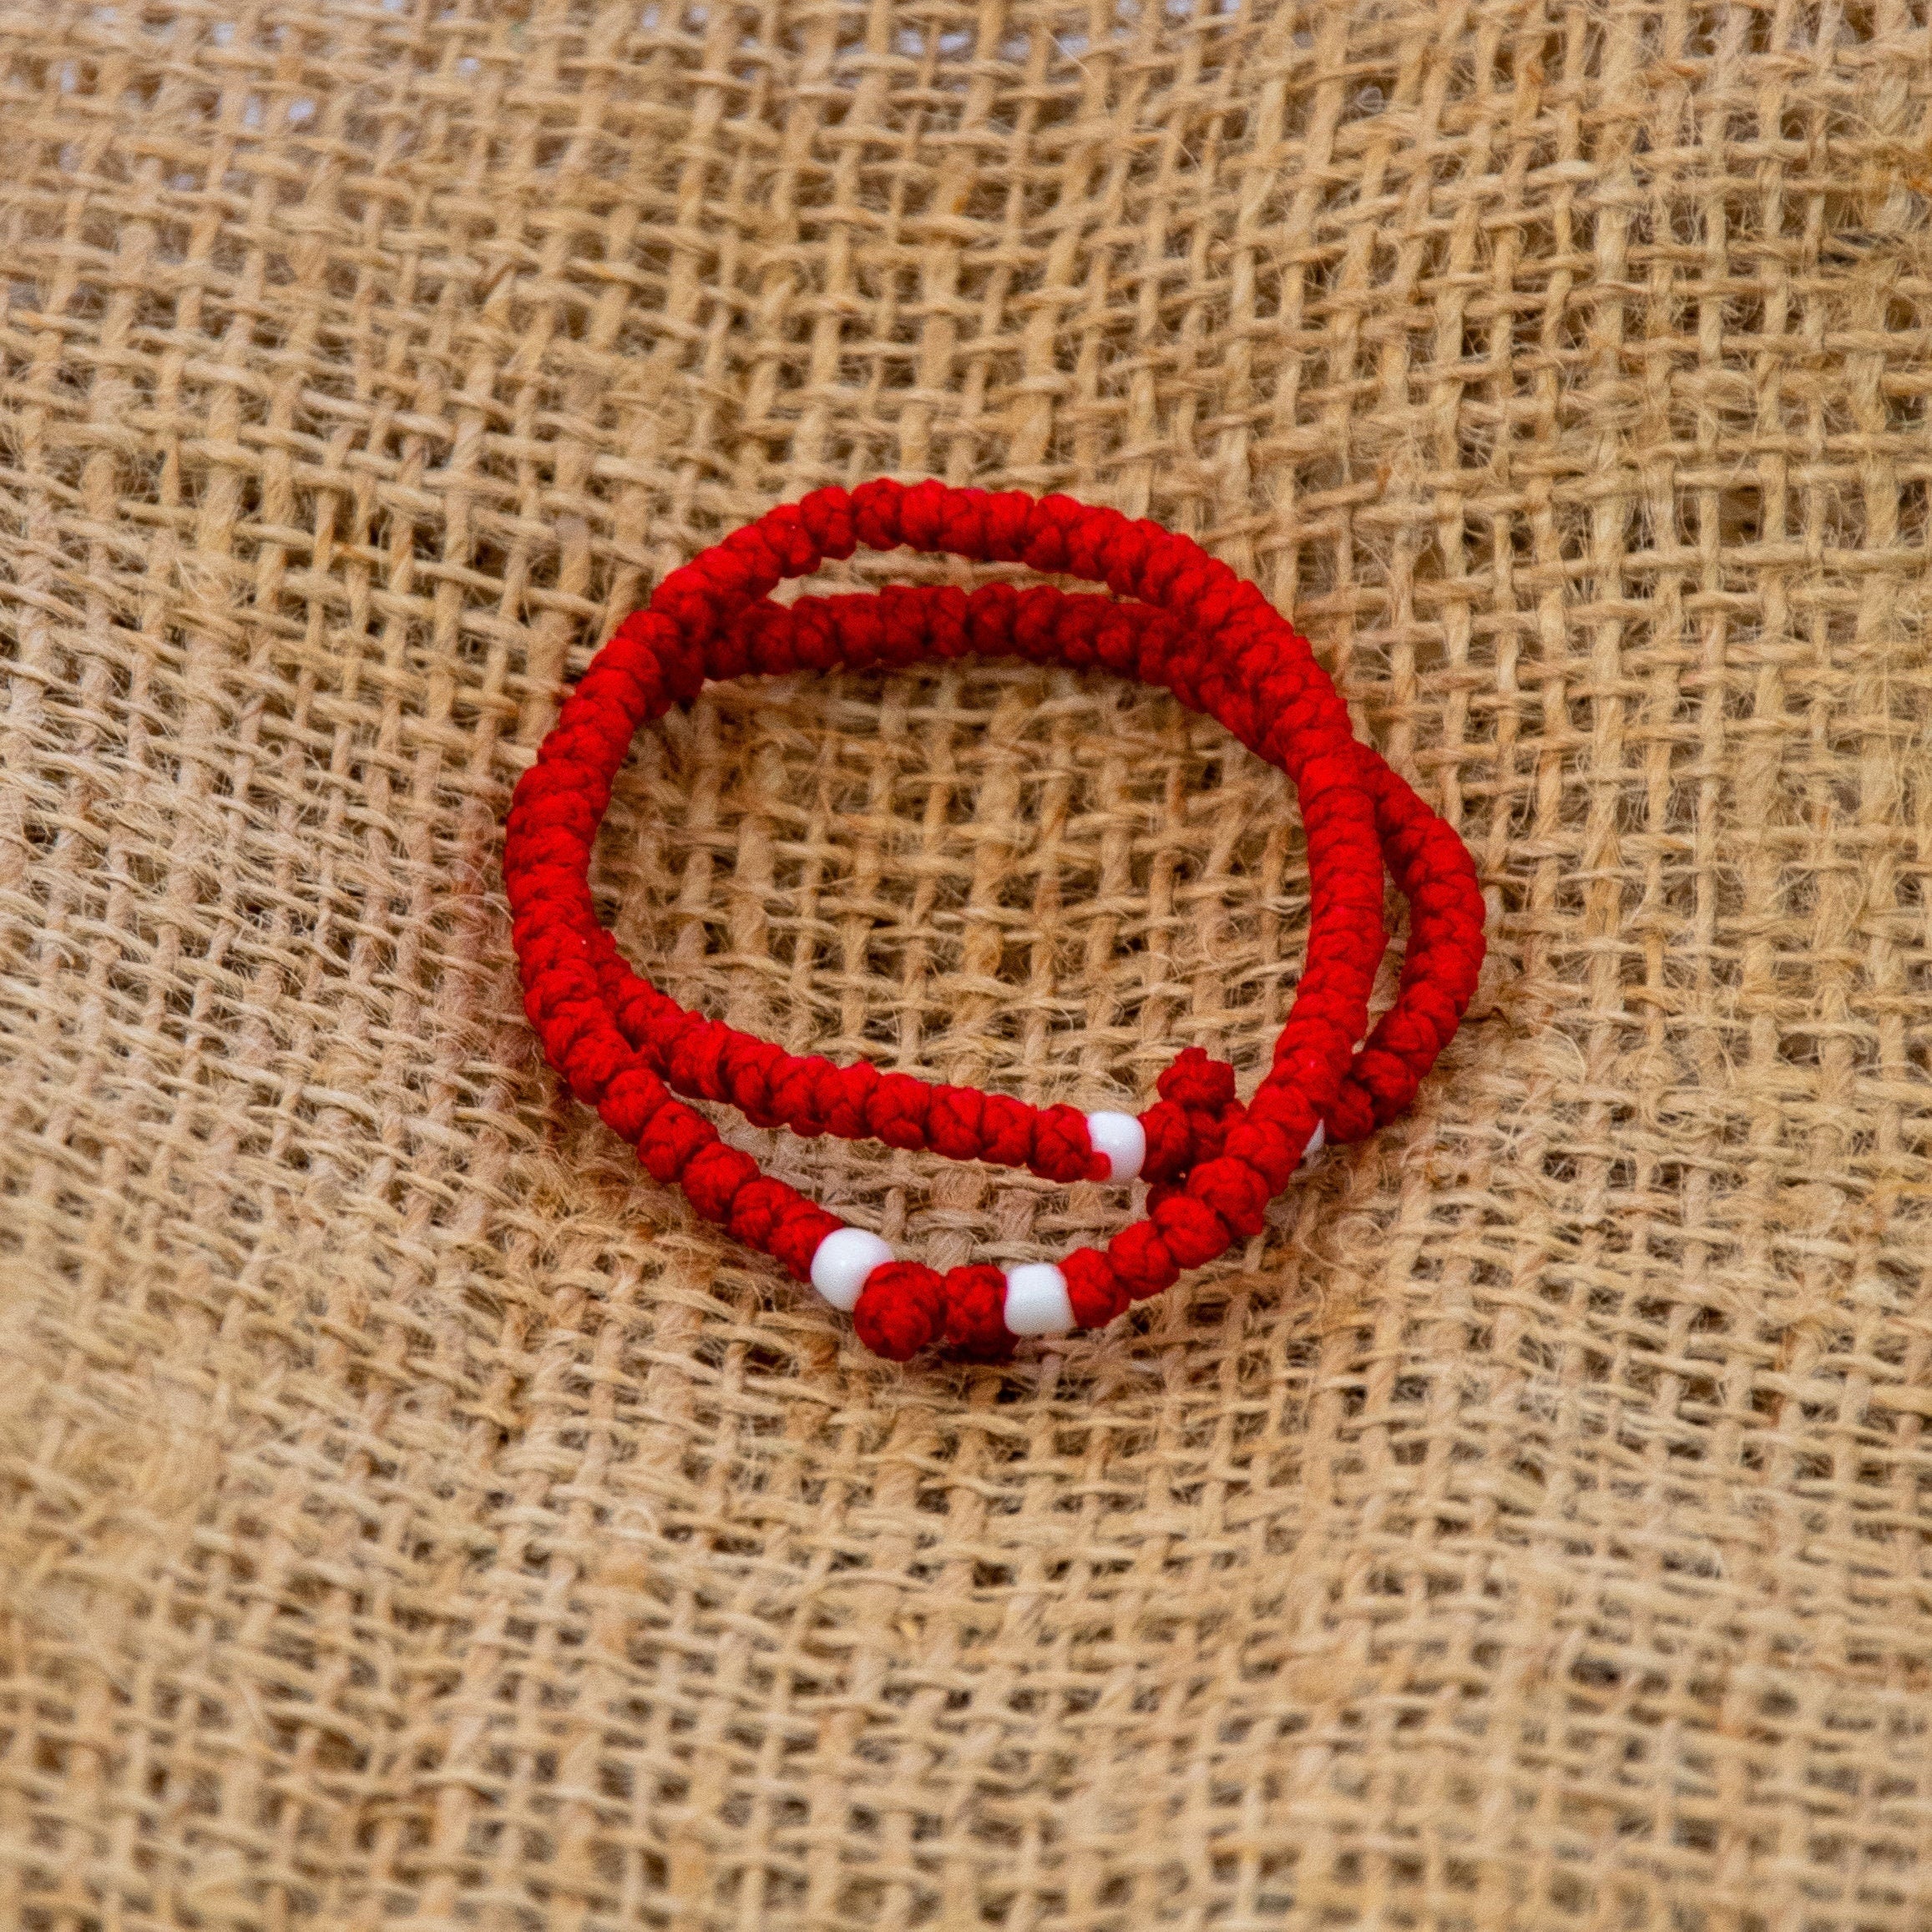 Amazon.com: Original Kabbalah 12” Red String Bracelet - Pack of 5 -  Protection against Evil Eye and Misfortune, 100% Authentic Woven Cotton  from Rachel's Tomb, Israel. Includes Ben Porat Blessing and Instructions :